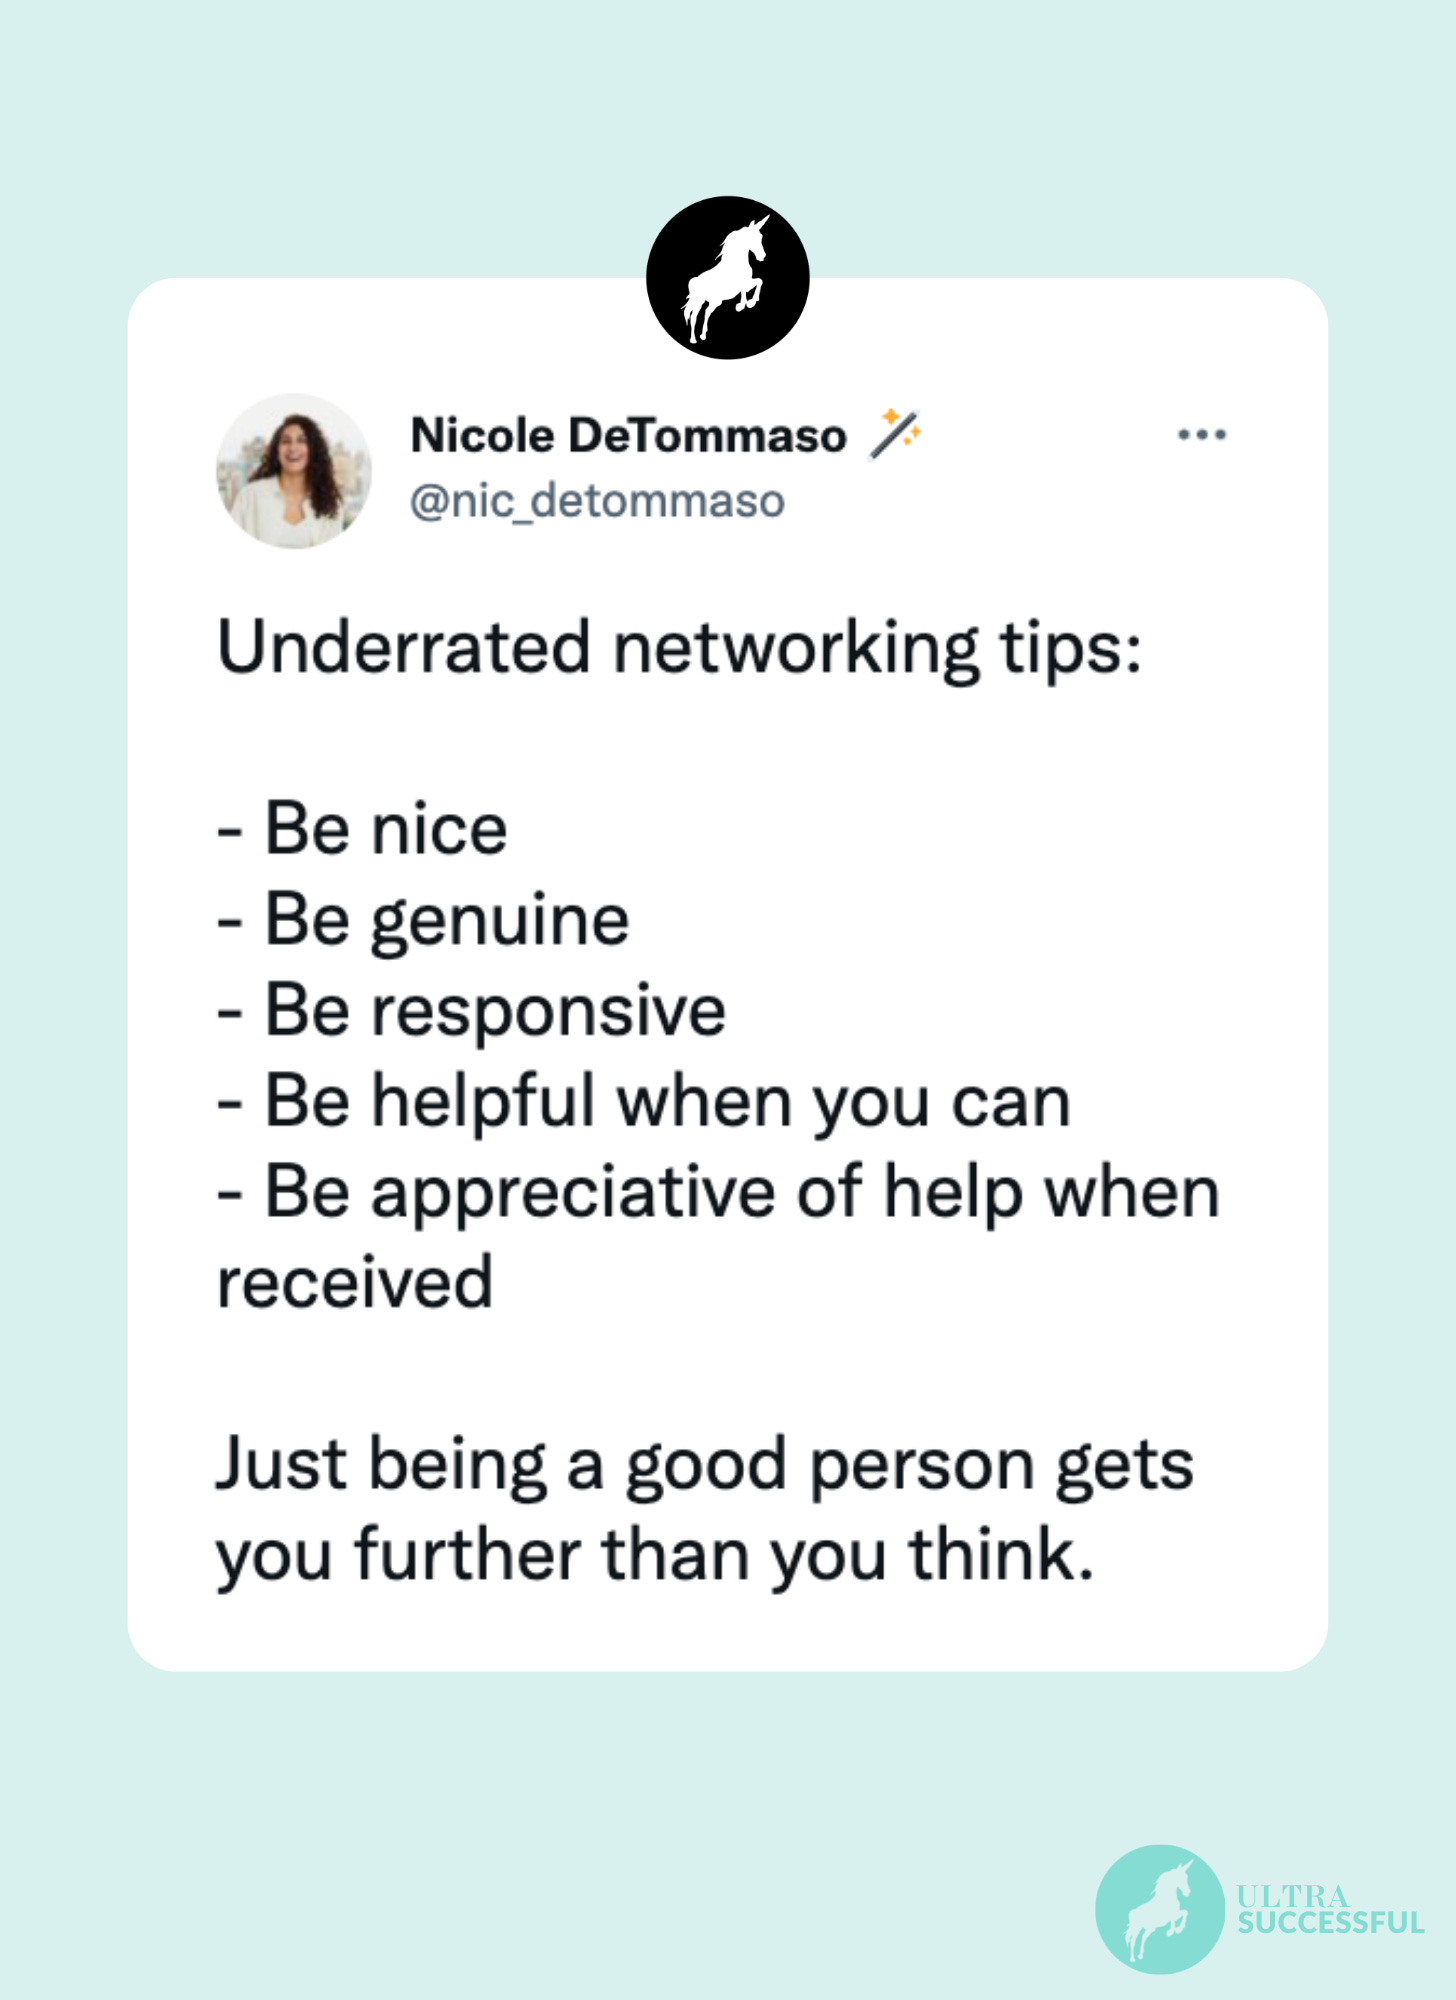 @nic_detommaso: Underrated networking tips:  - Be nice - Be genuine - Be responsive - Be helpful when you can - Be appreciative of help when received  Just being a good person gets you further than you think.